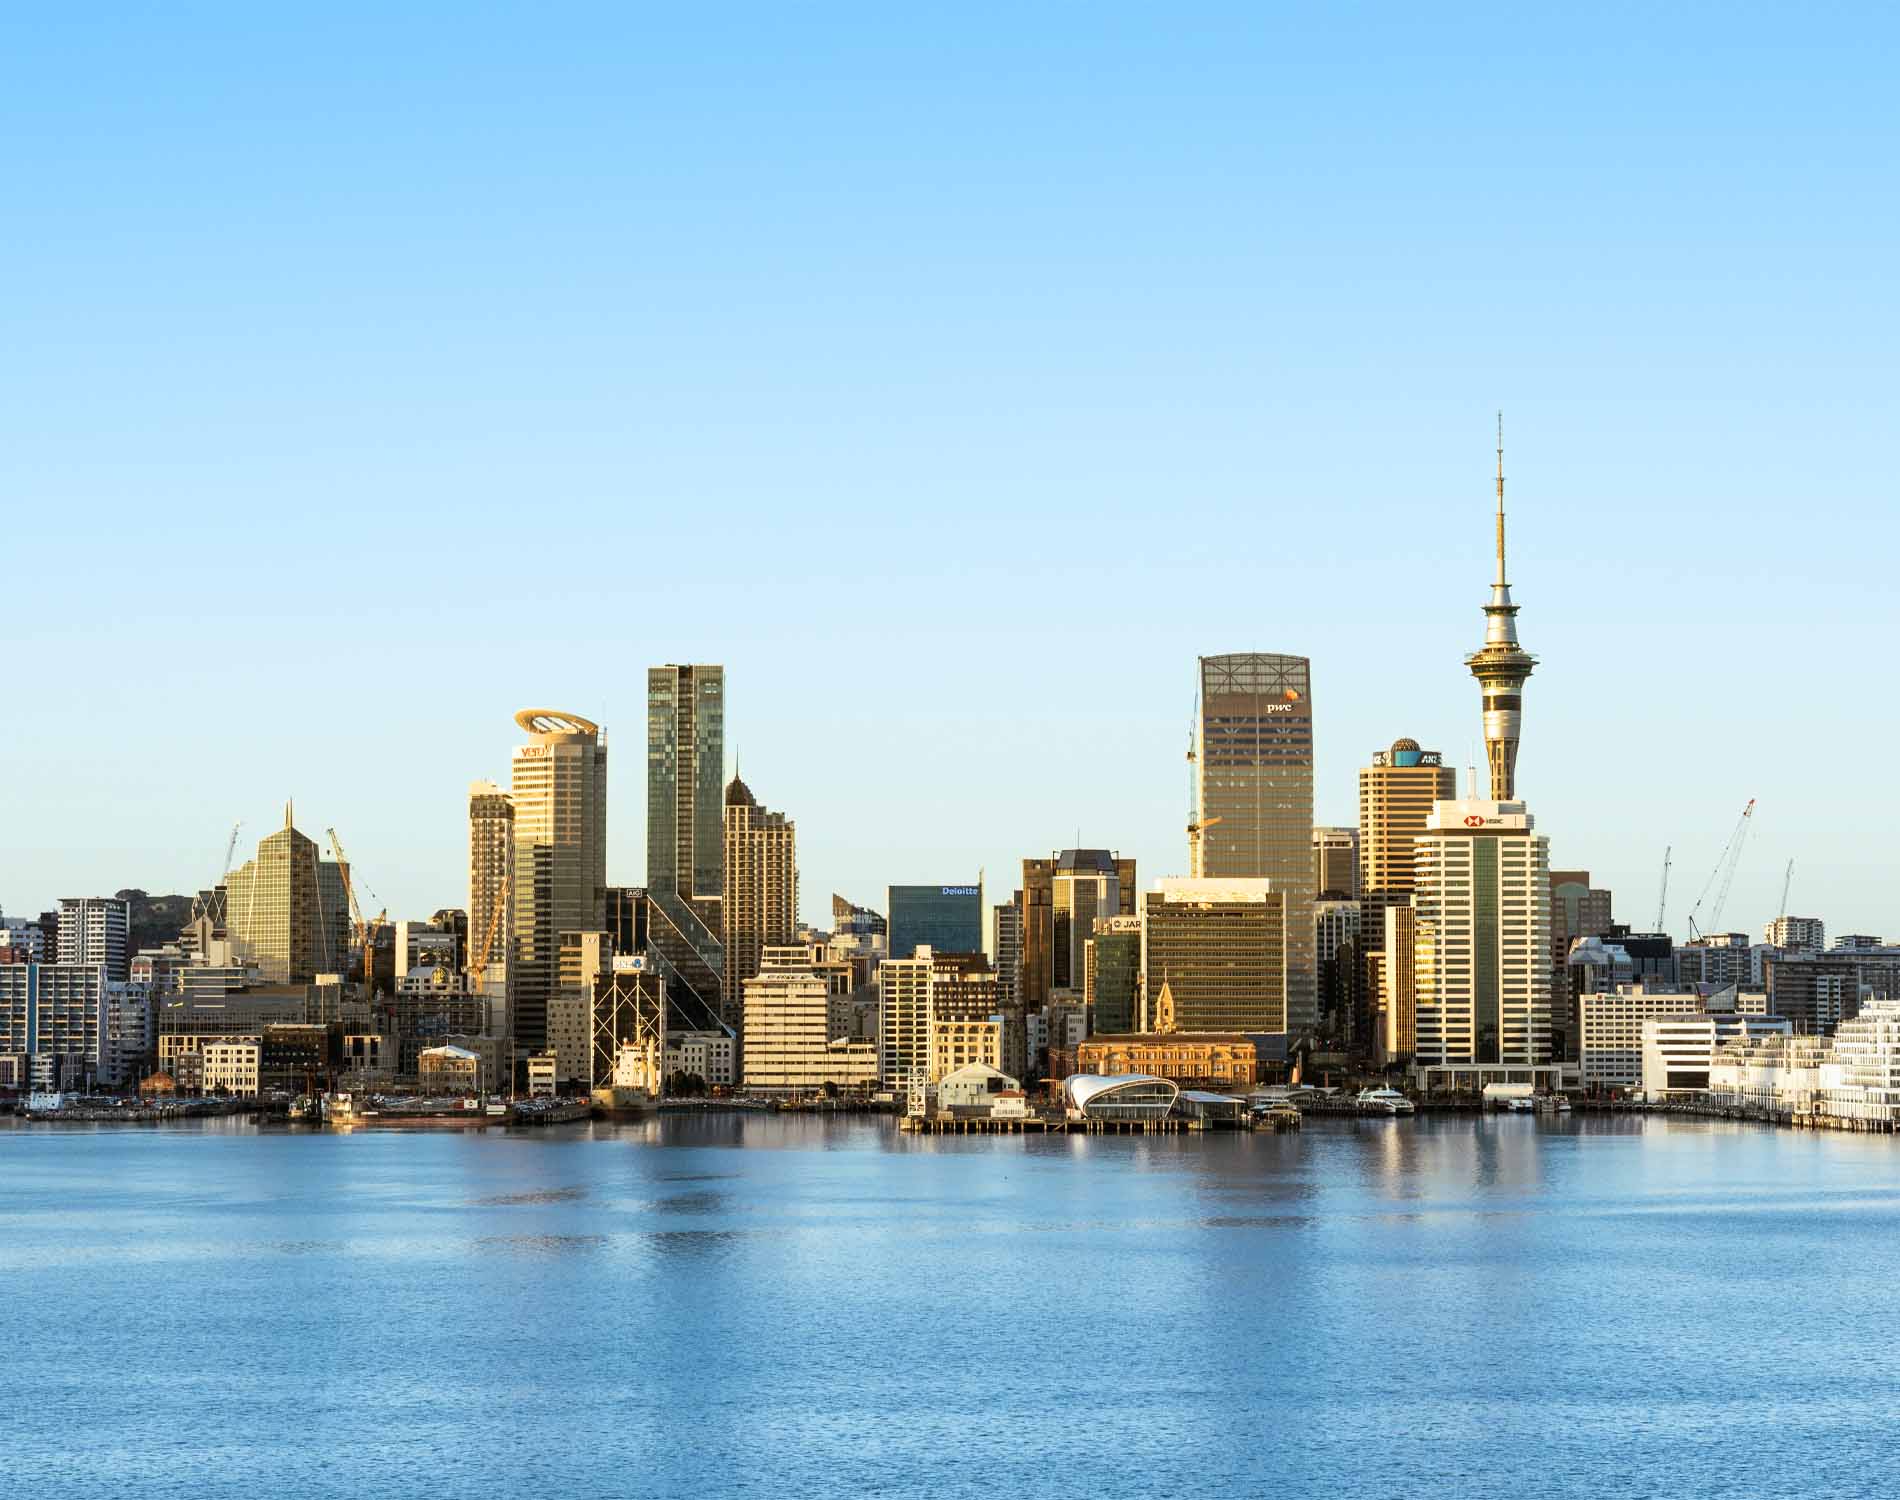 /-/media/images/website/background-images/offices/auckland/auckland-webbg.ashx